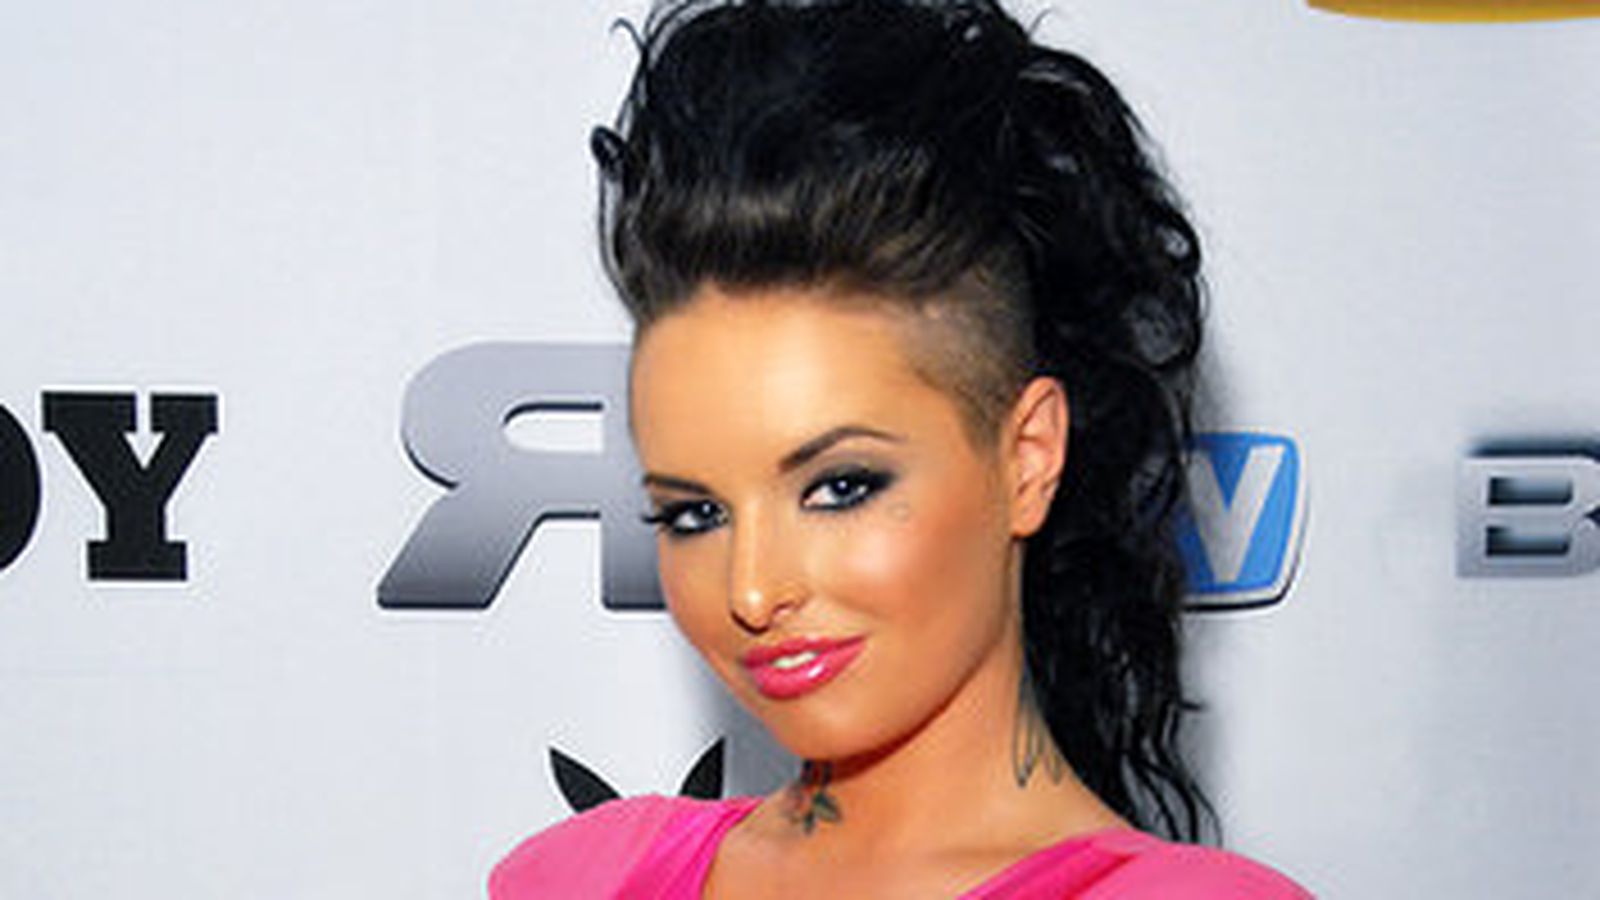 Opinion: The MMA community can prove something positive by helping Christy  Mack - Bloody Elbow